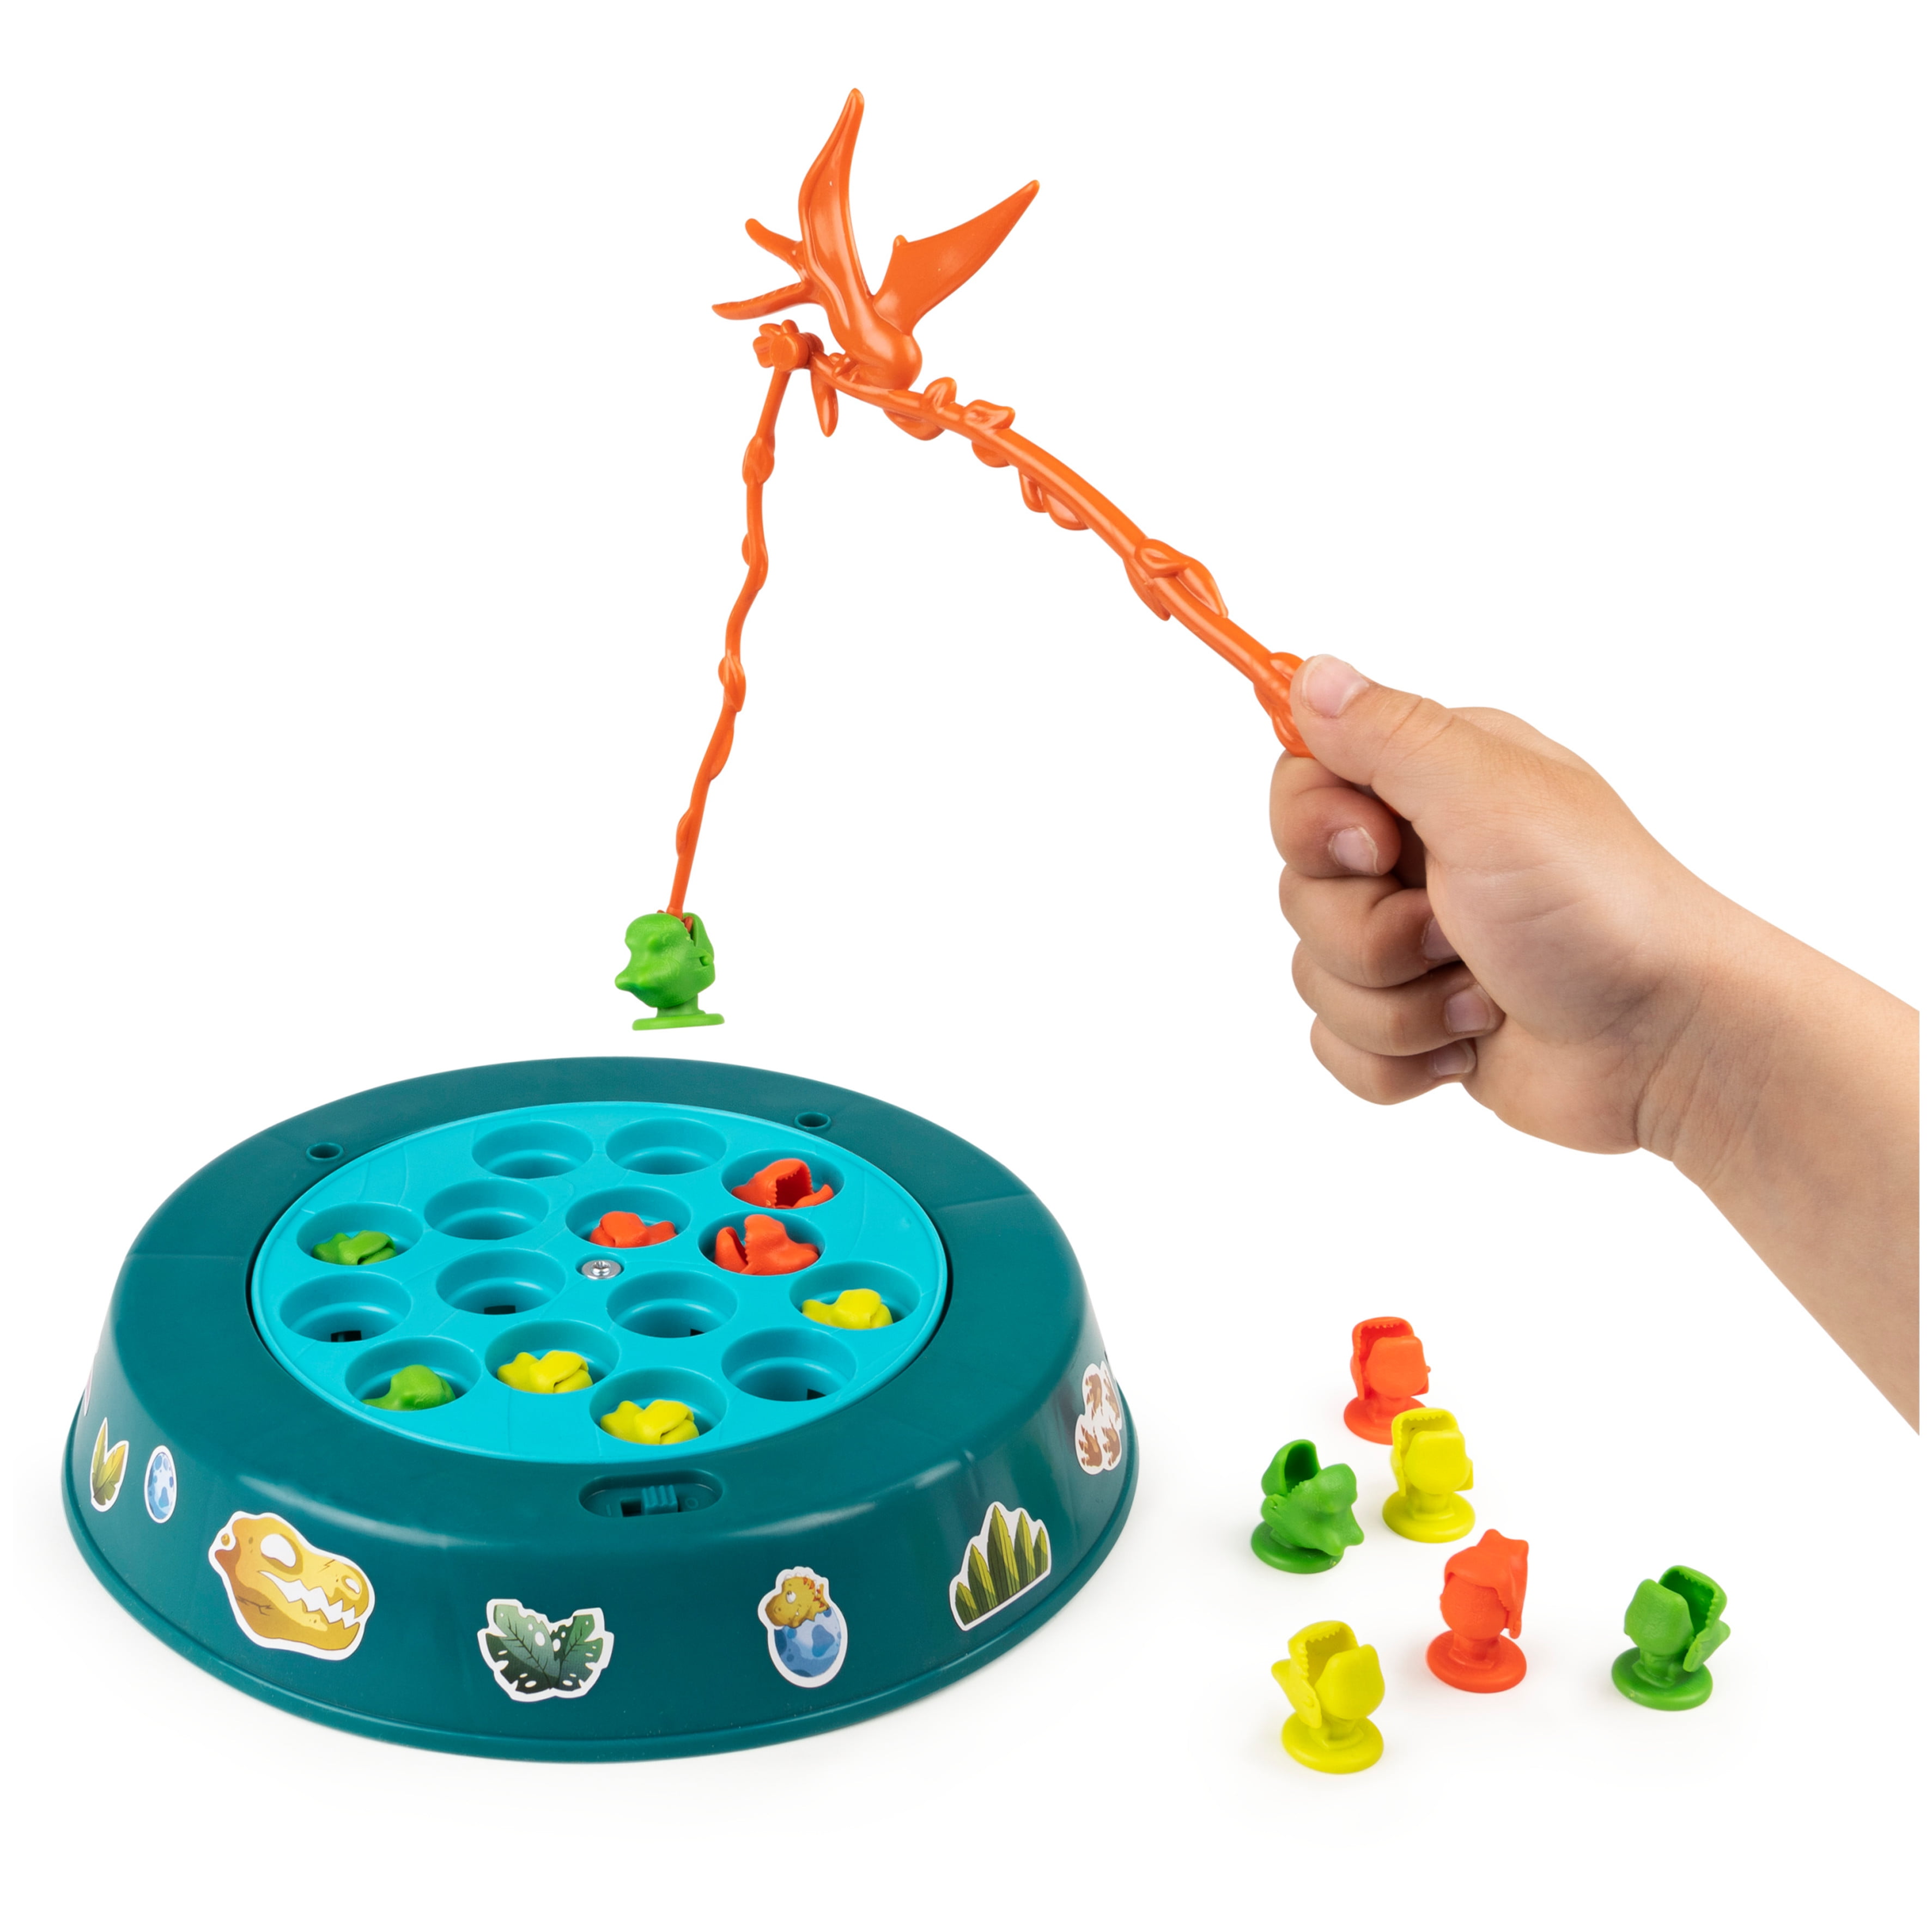 Spin Master Dino Dive Fishing Game, Fun Prehistoric Dinosaur Toy, for Kids Ages 4+